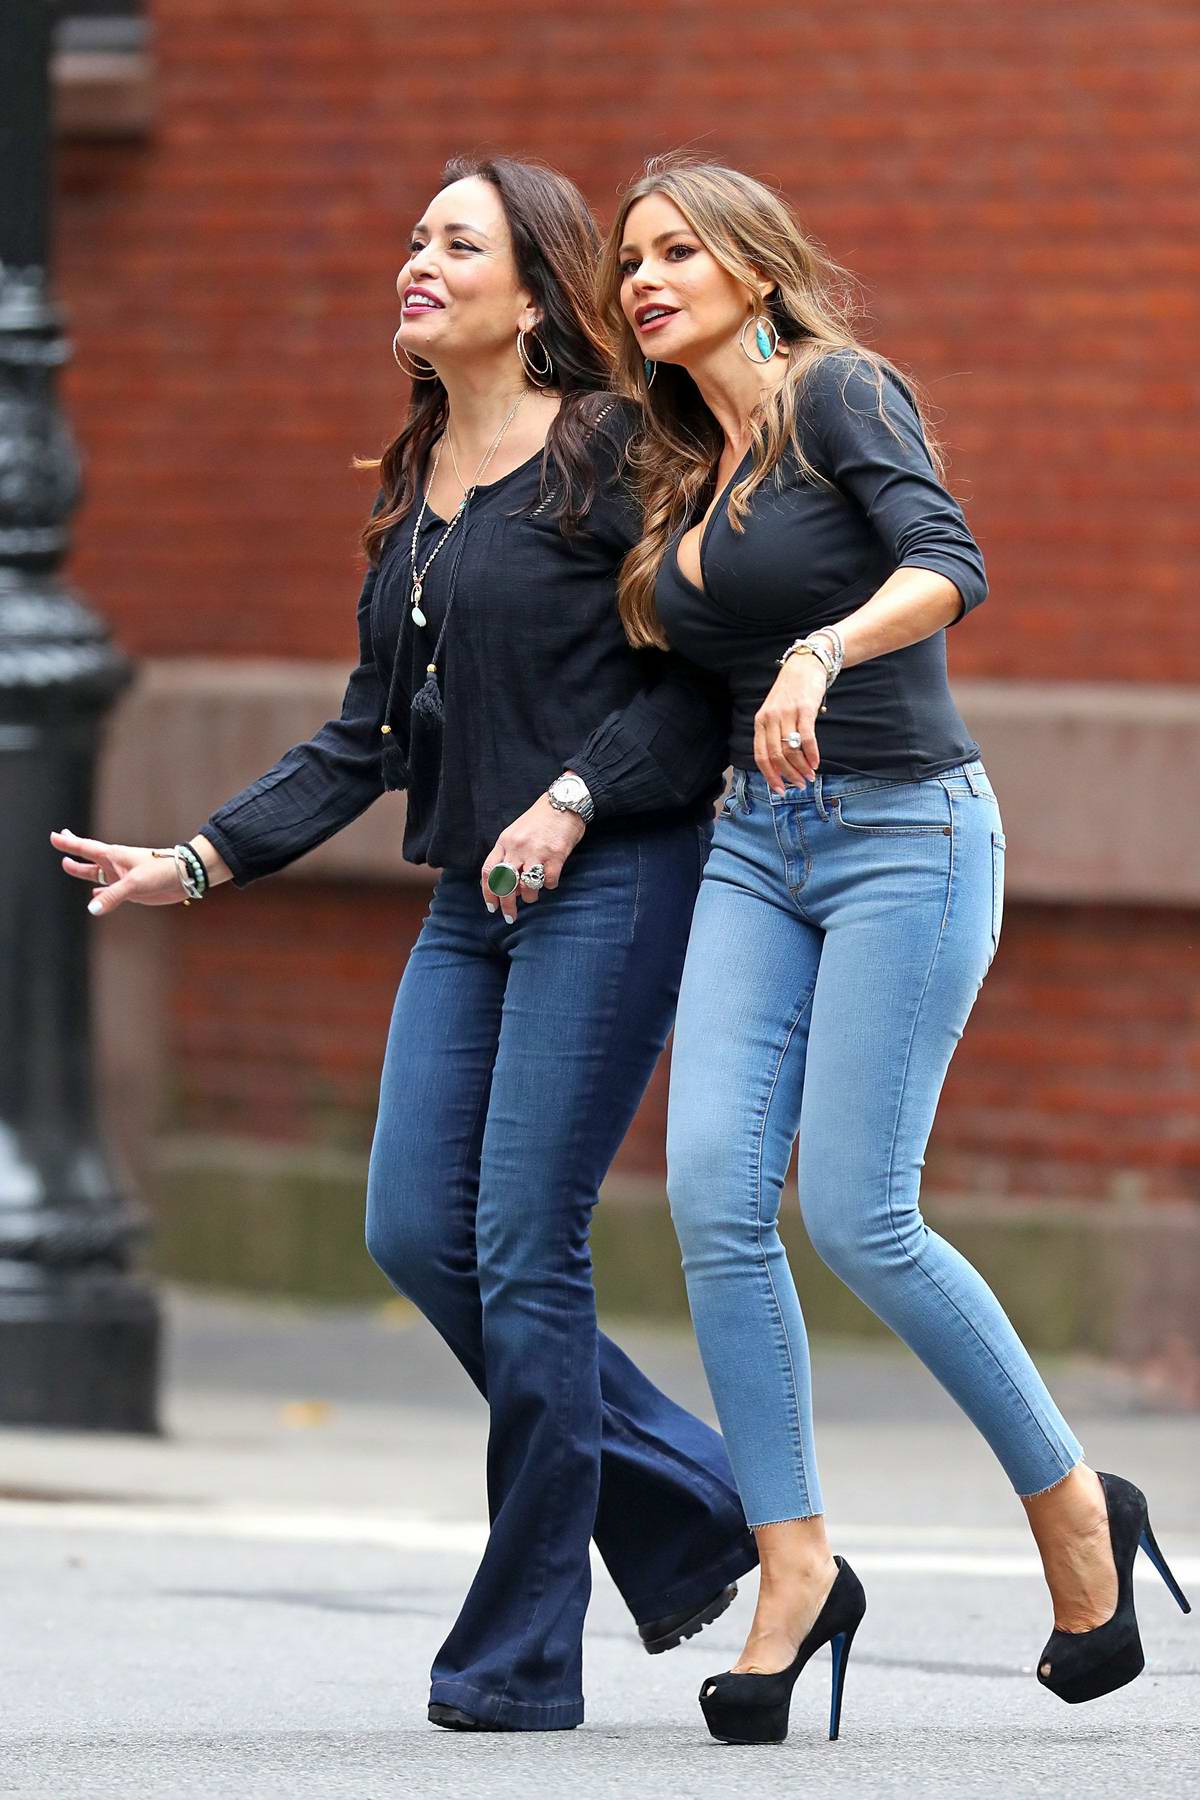 Sofia Vergara flaunts chic style in jeans and sky-high heels while